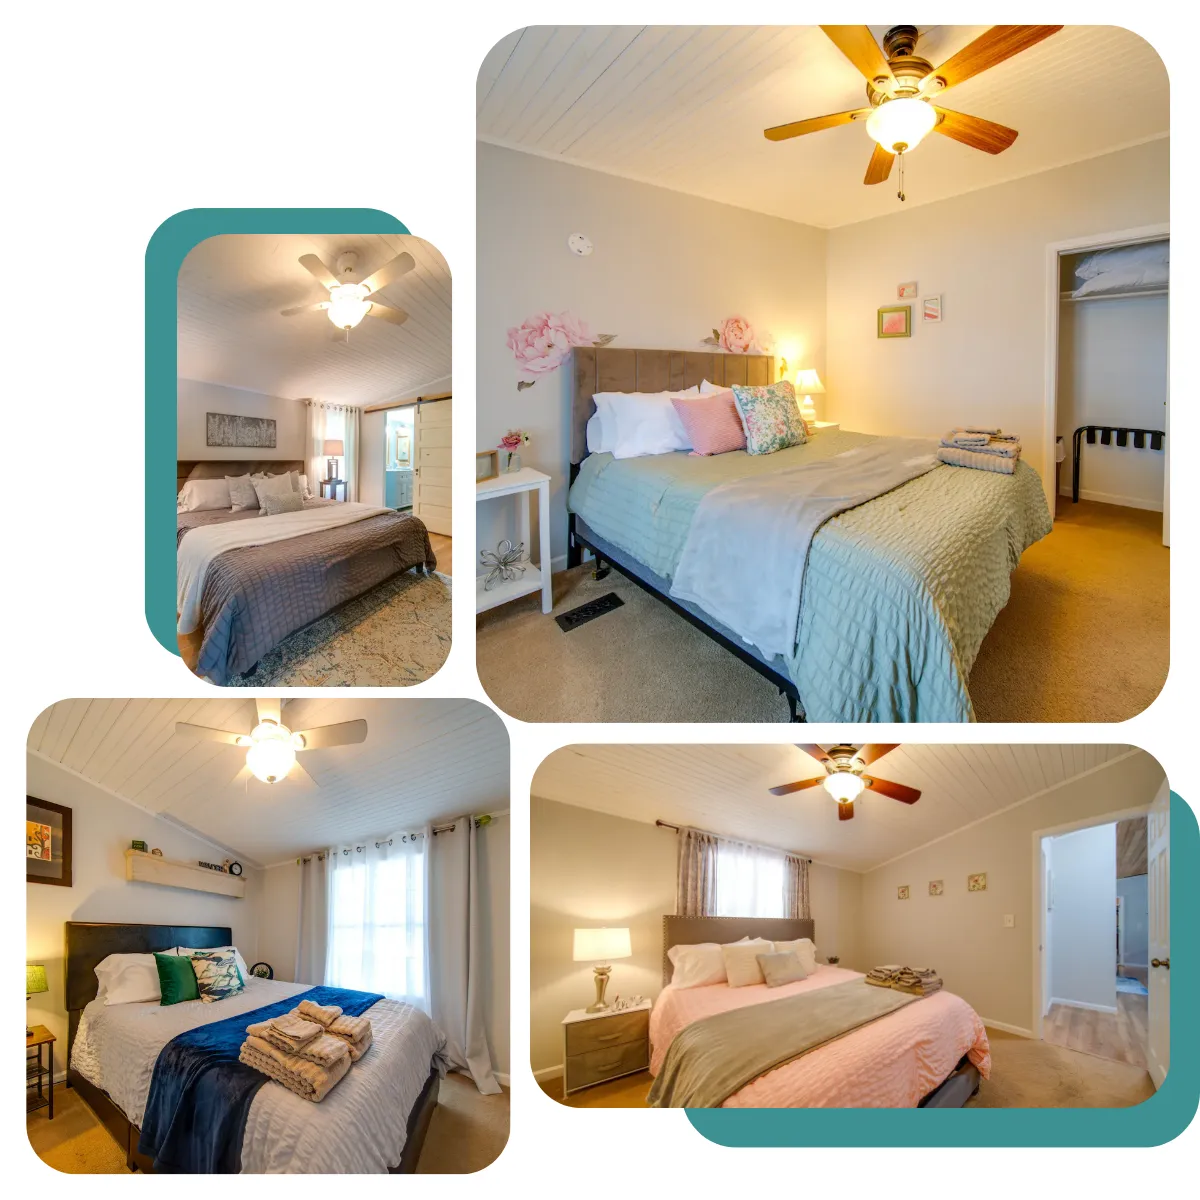 At Lake Wylie Retreat, find a king bed in the master bedroom, a queen bed in two rooms, and a bunk bed in another for kids or extra guests.